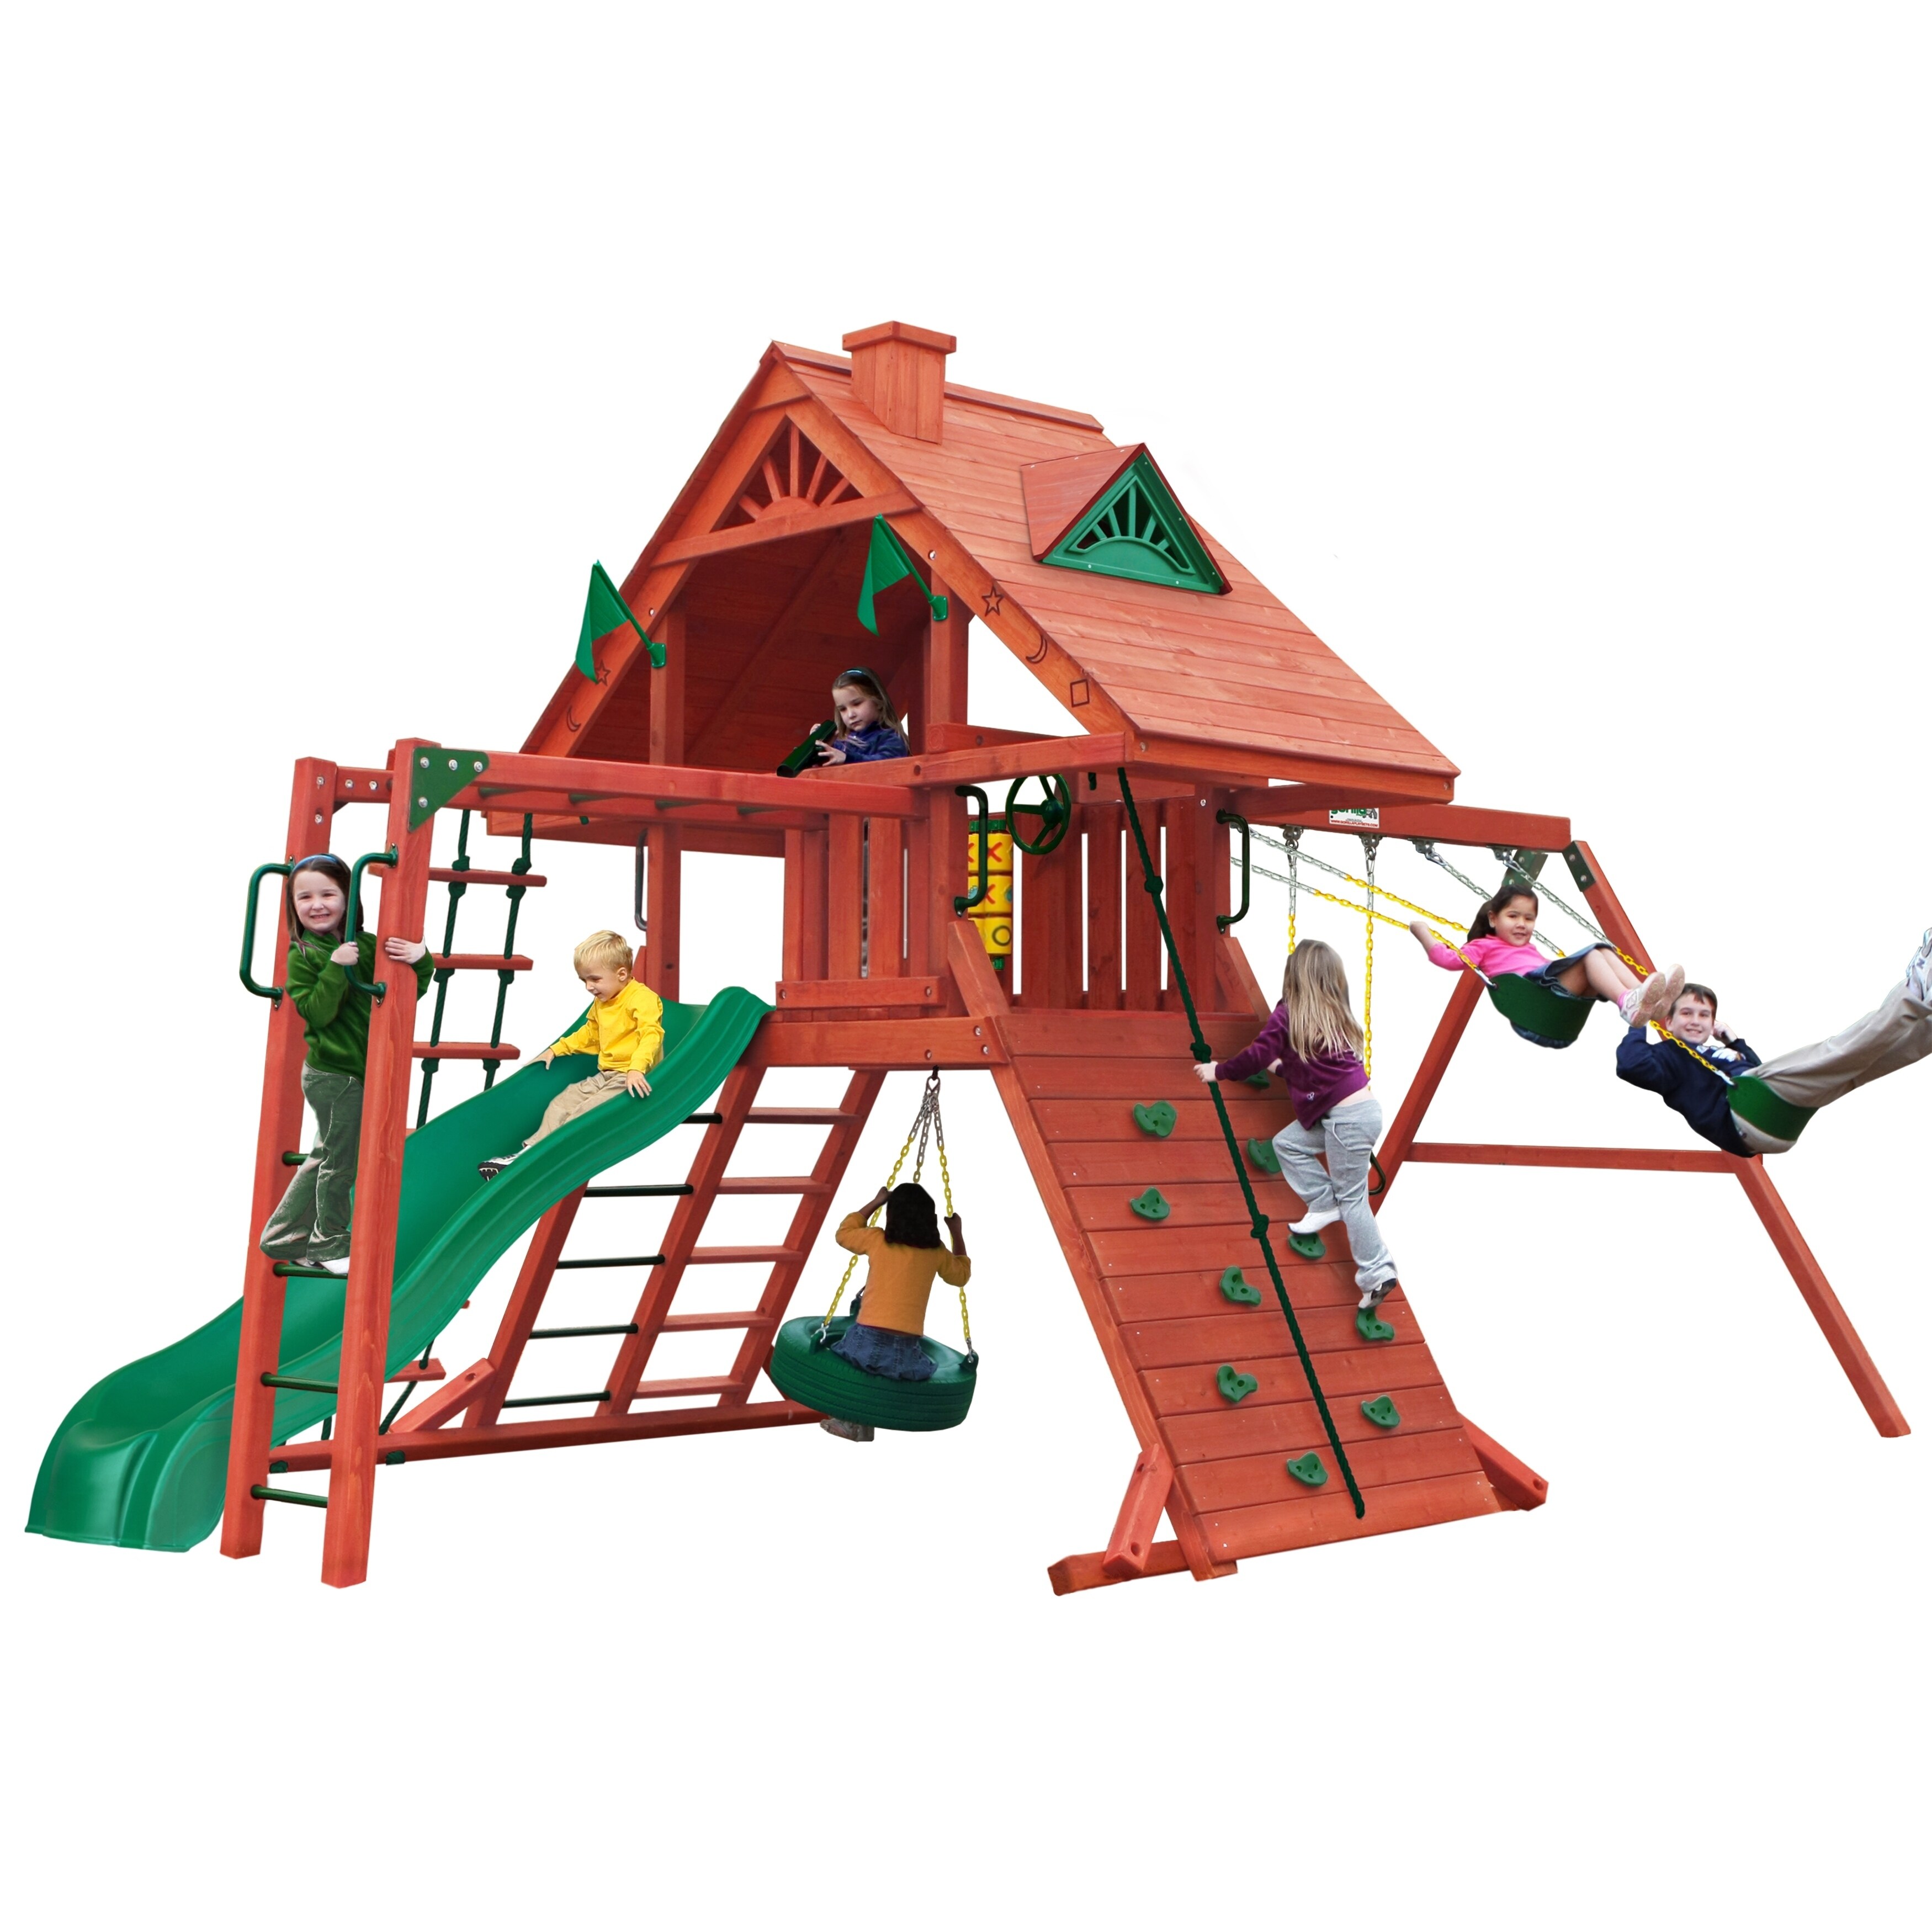 Buy Gorilla Playsets Swing Sets Online At Overstockcom Our Best